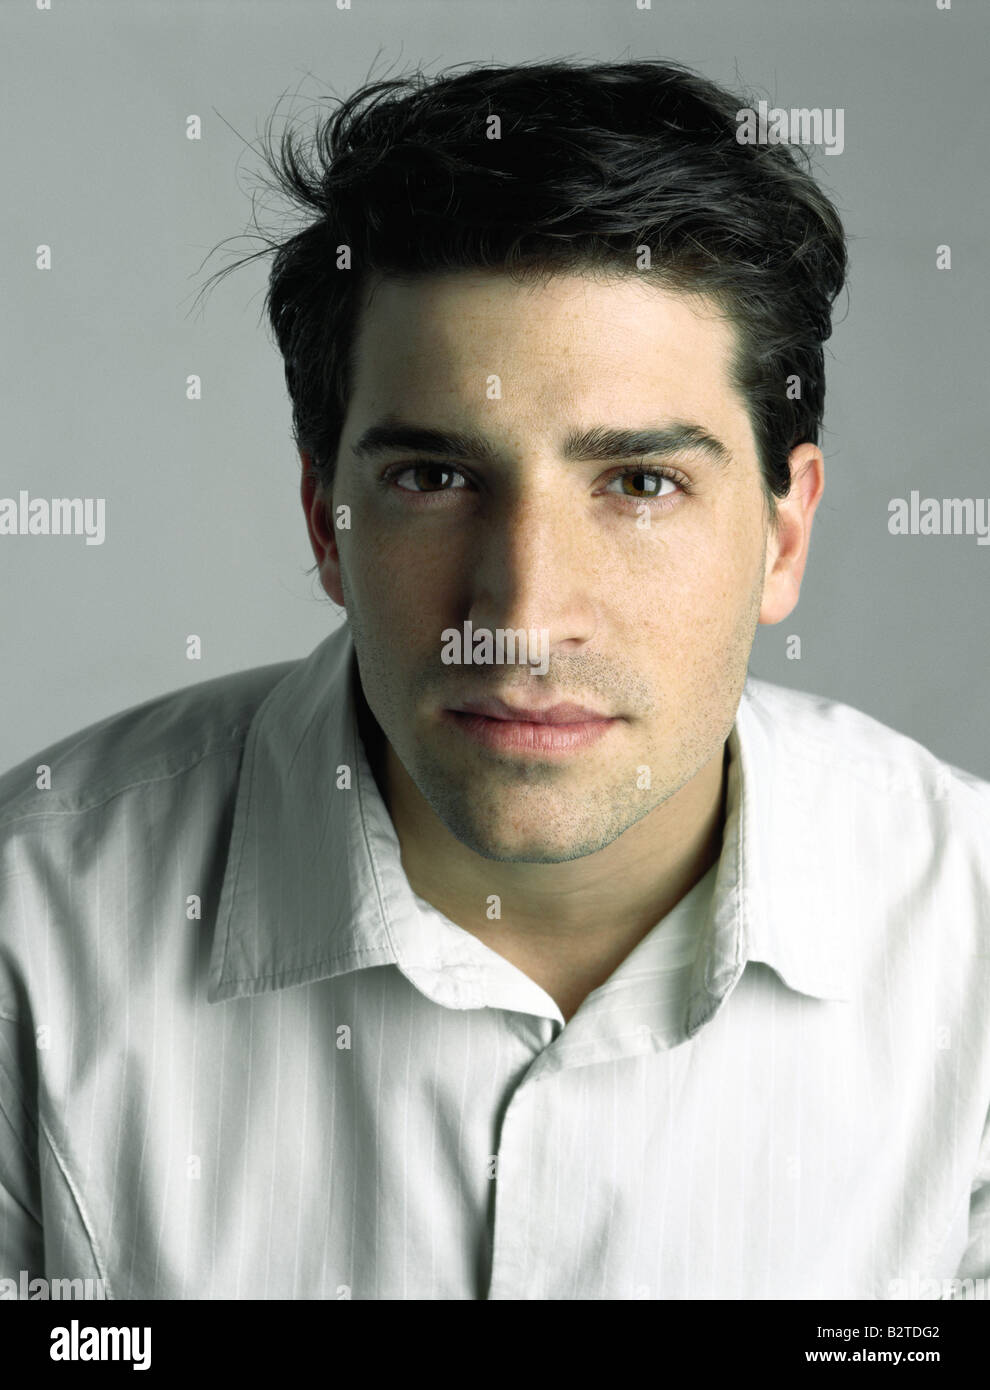 Young man looking at camera, portrait Stock Photo